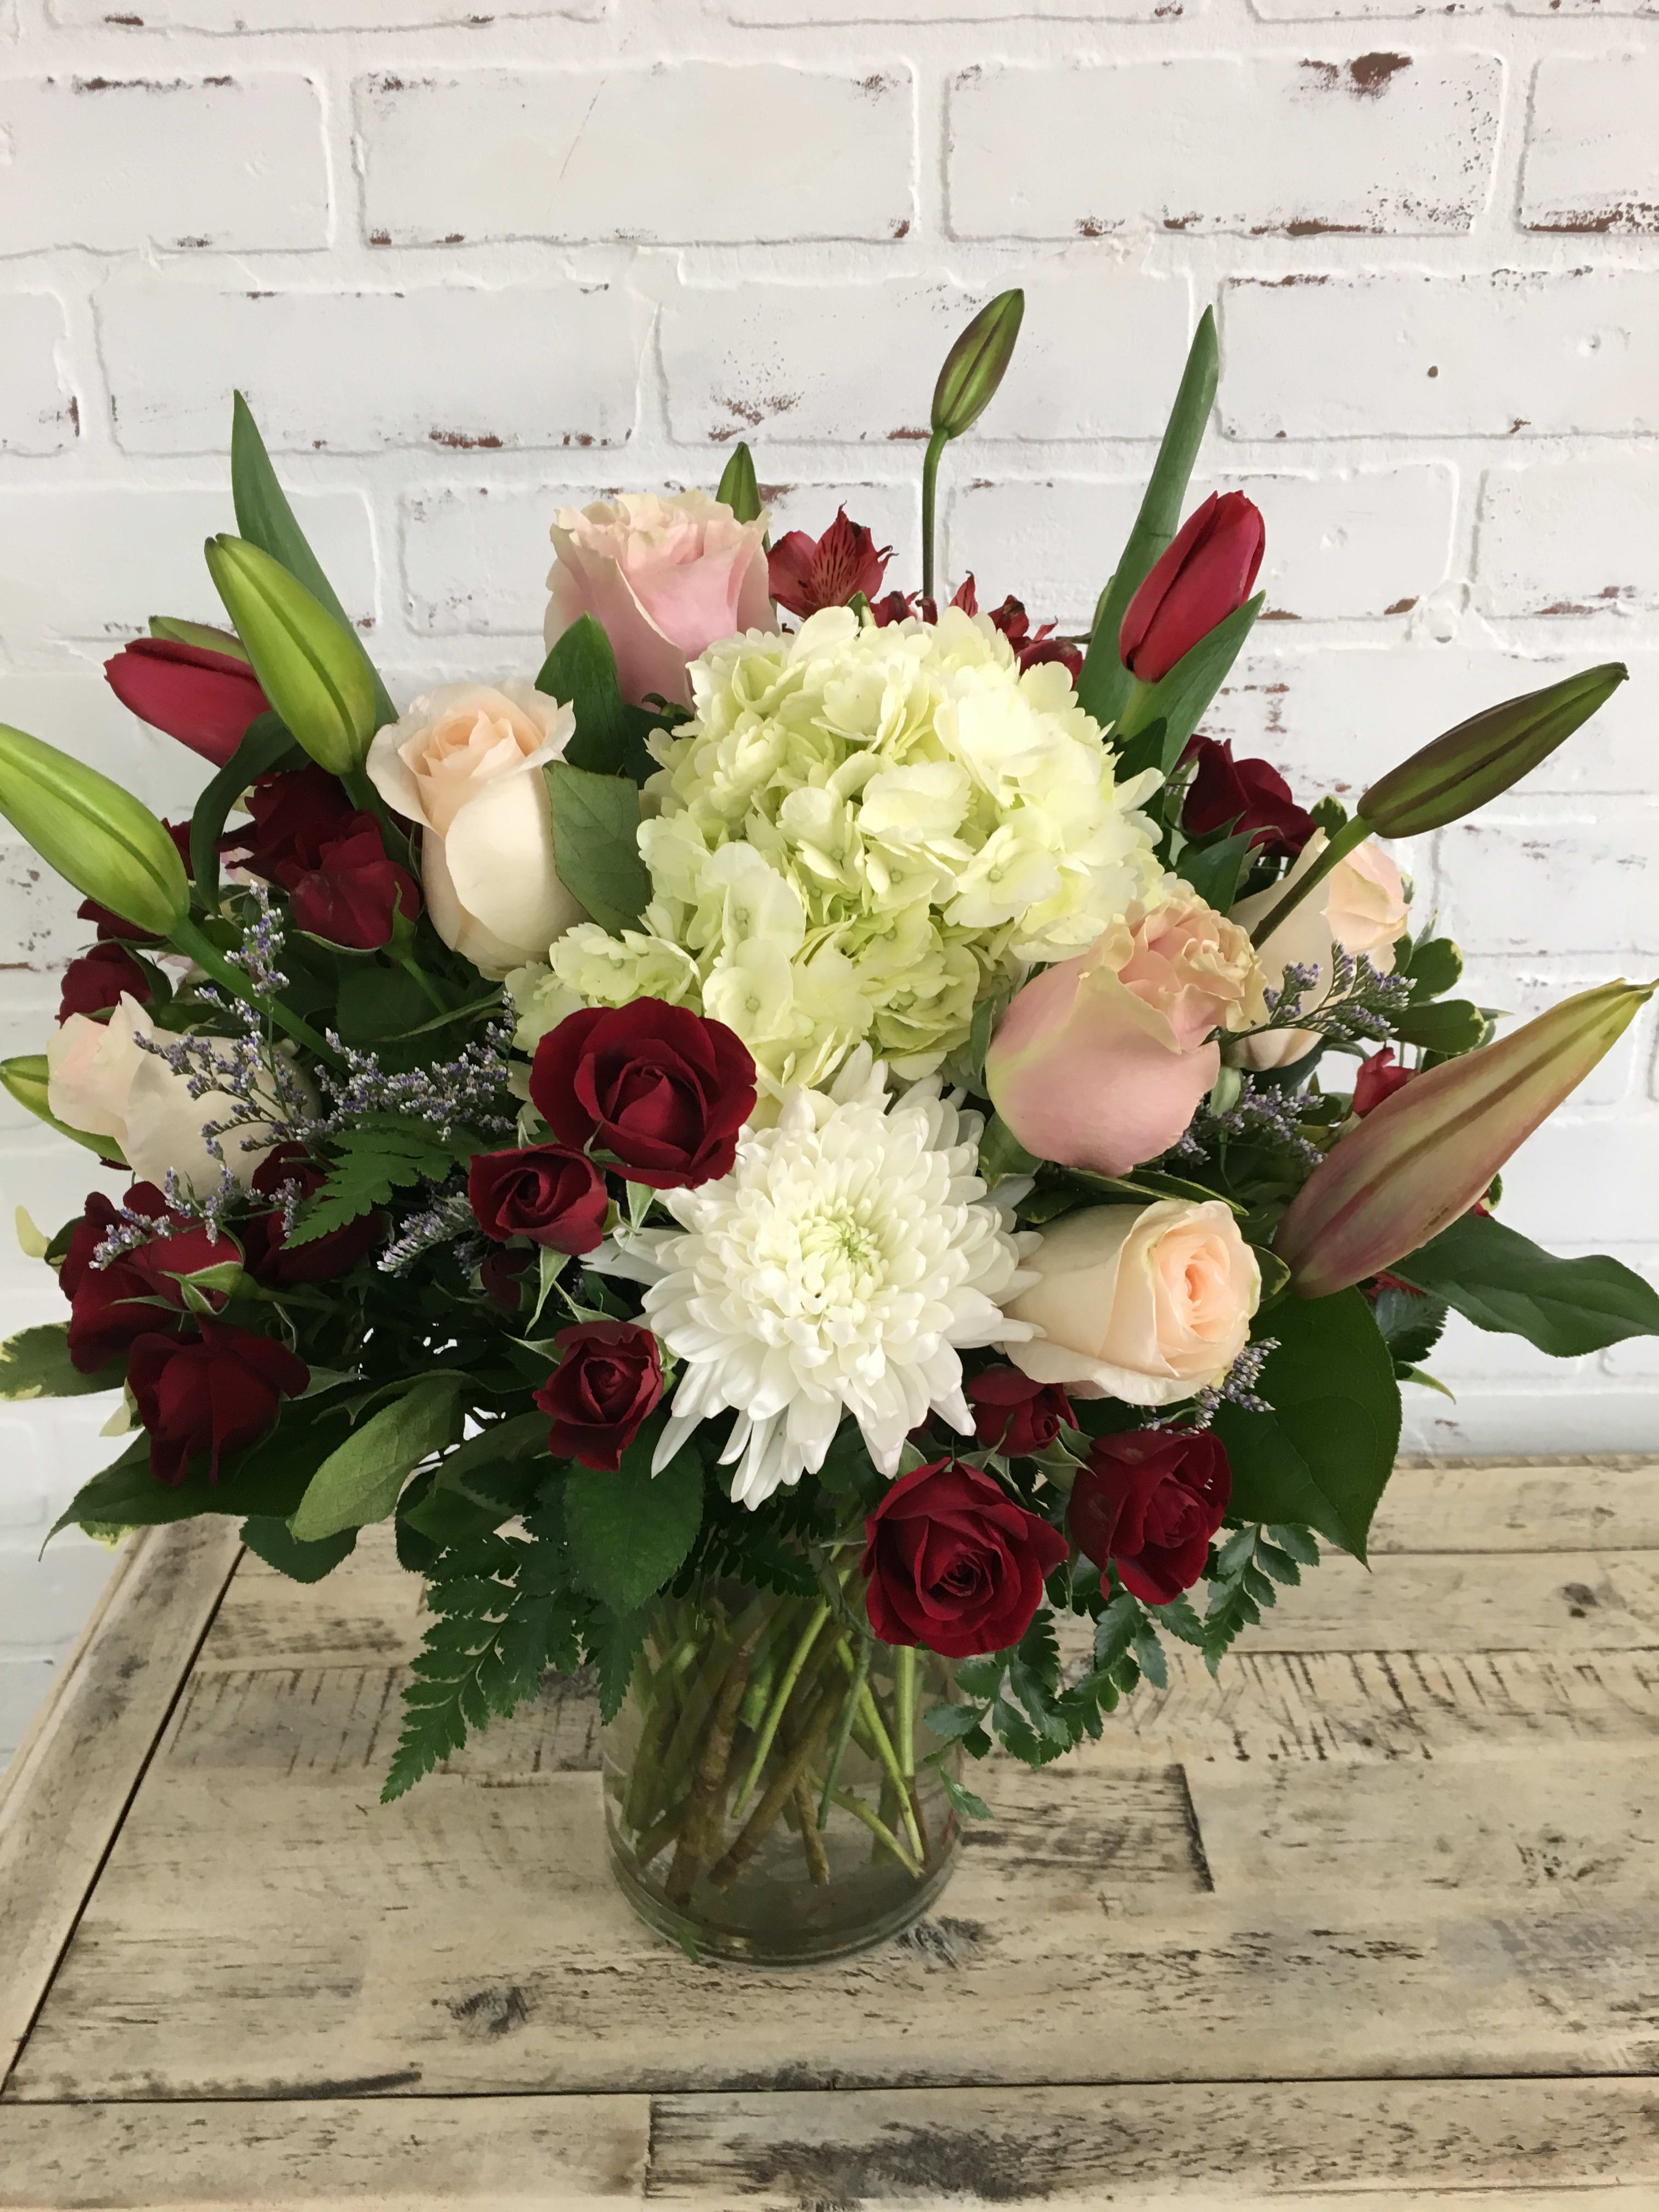 Bouquet of love - Romantic bouquet of pink roses, lilies, hydrangea, mums, and tulips for the one you love